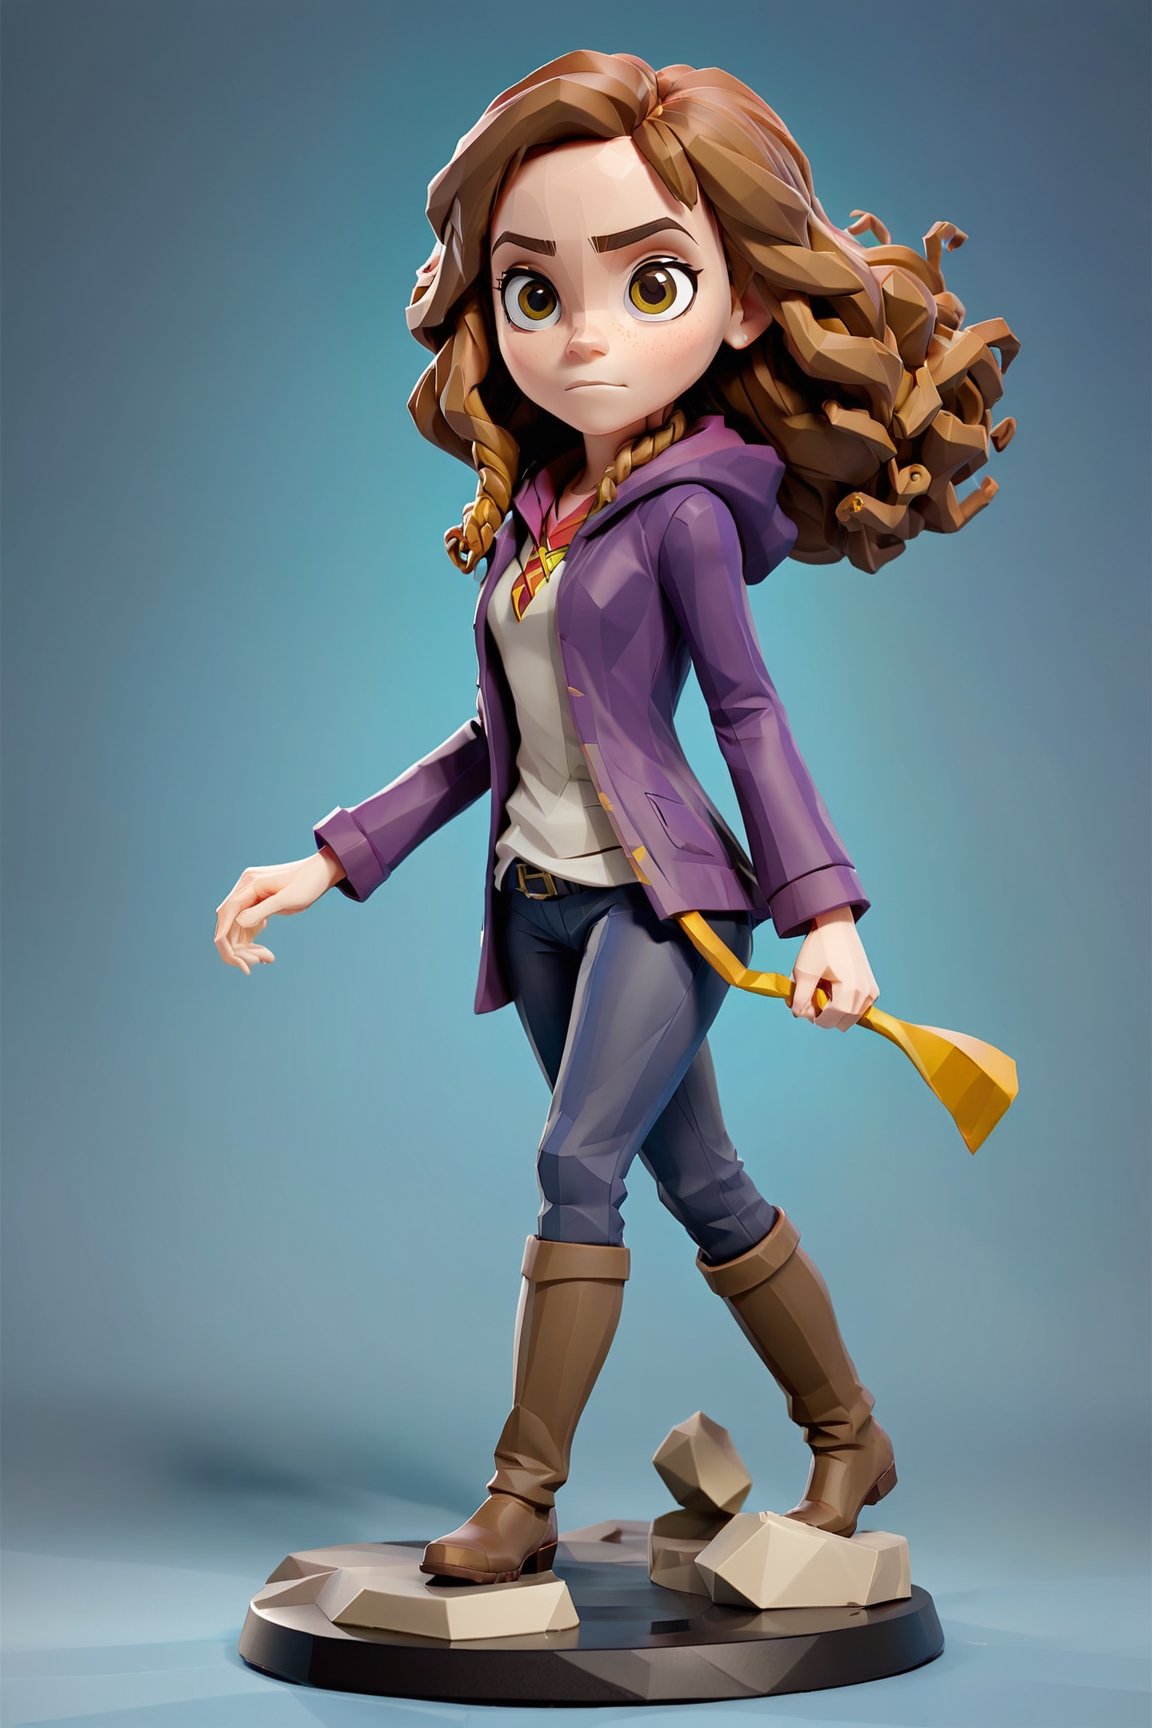 Hermione Granger from harry potter as a Disney Infinity figurine, very stylized, exaggerated features